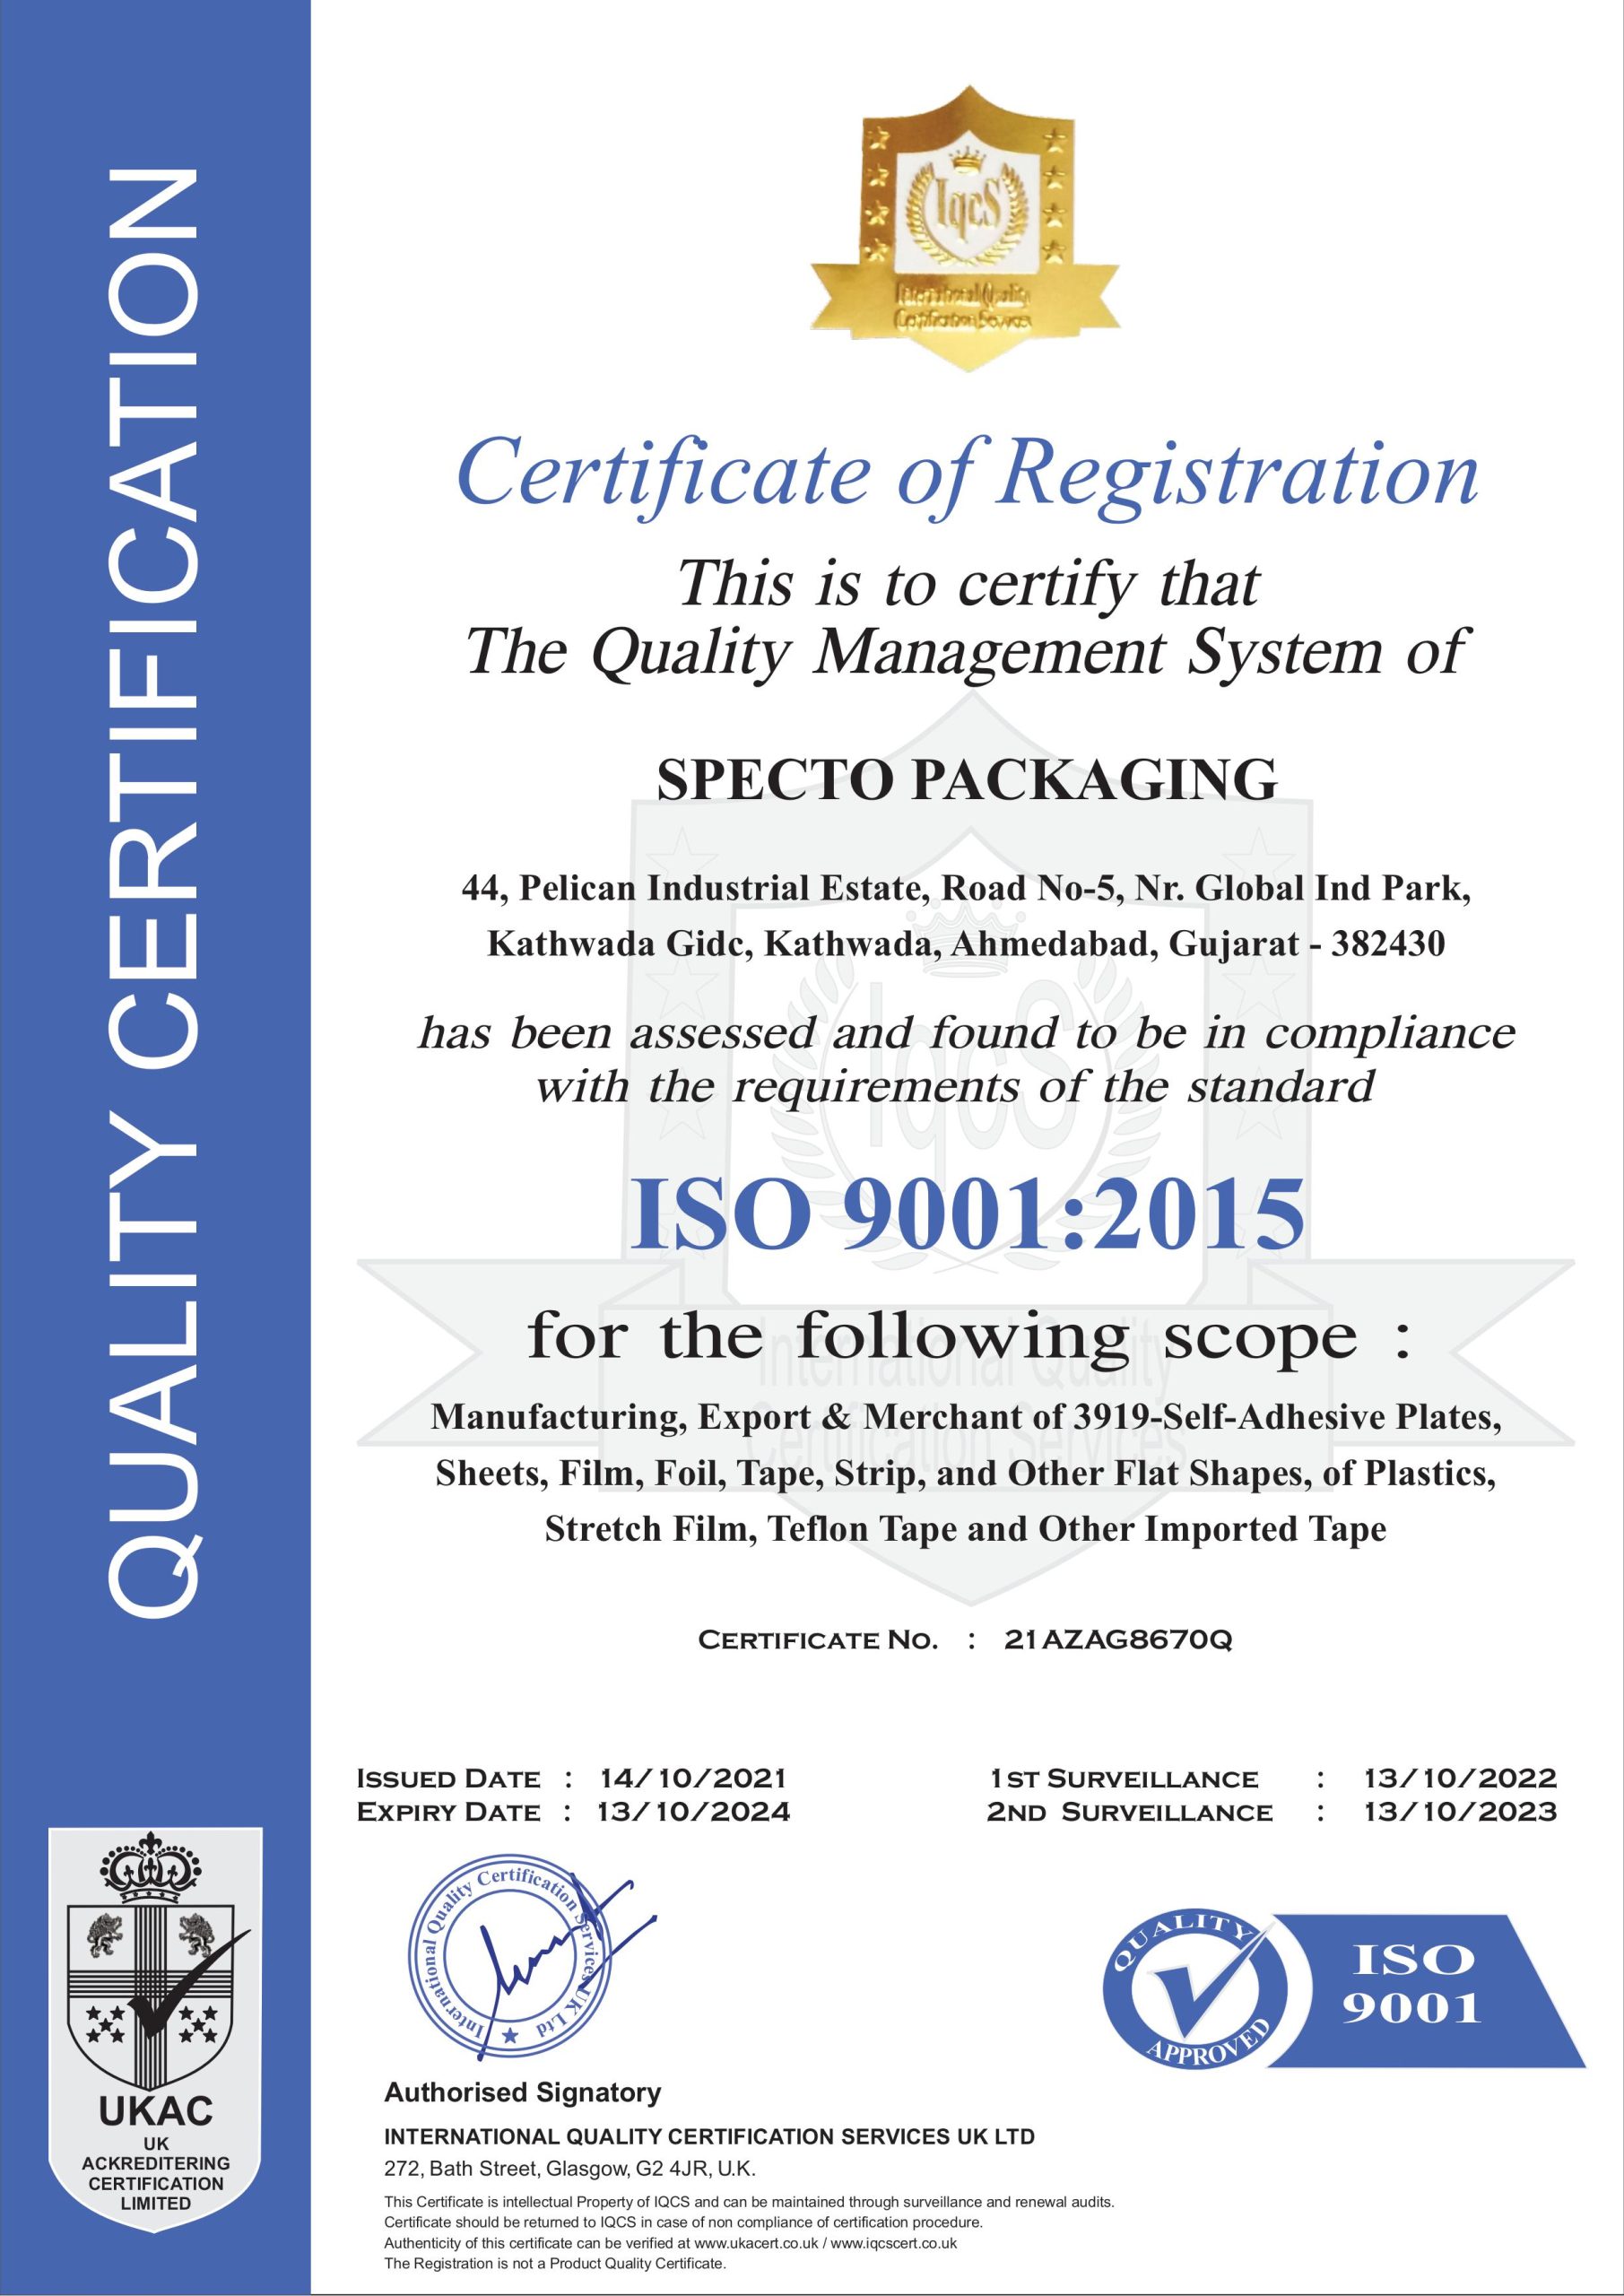 ISO-CERTIFICATE_SPECTO-PACKAGING-scaled